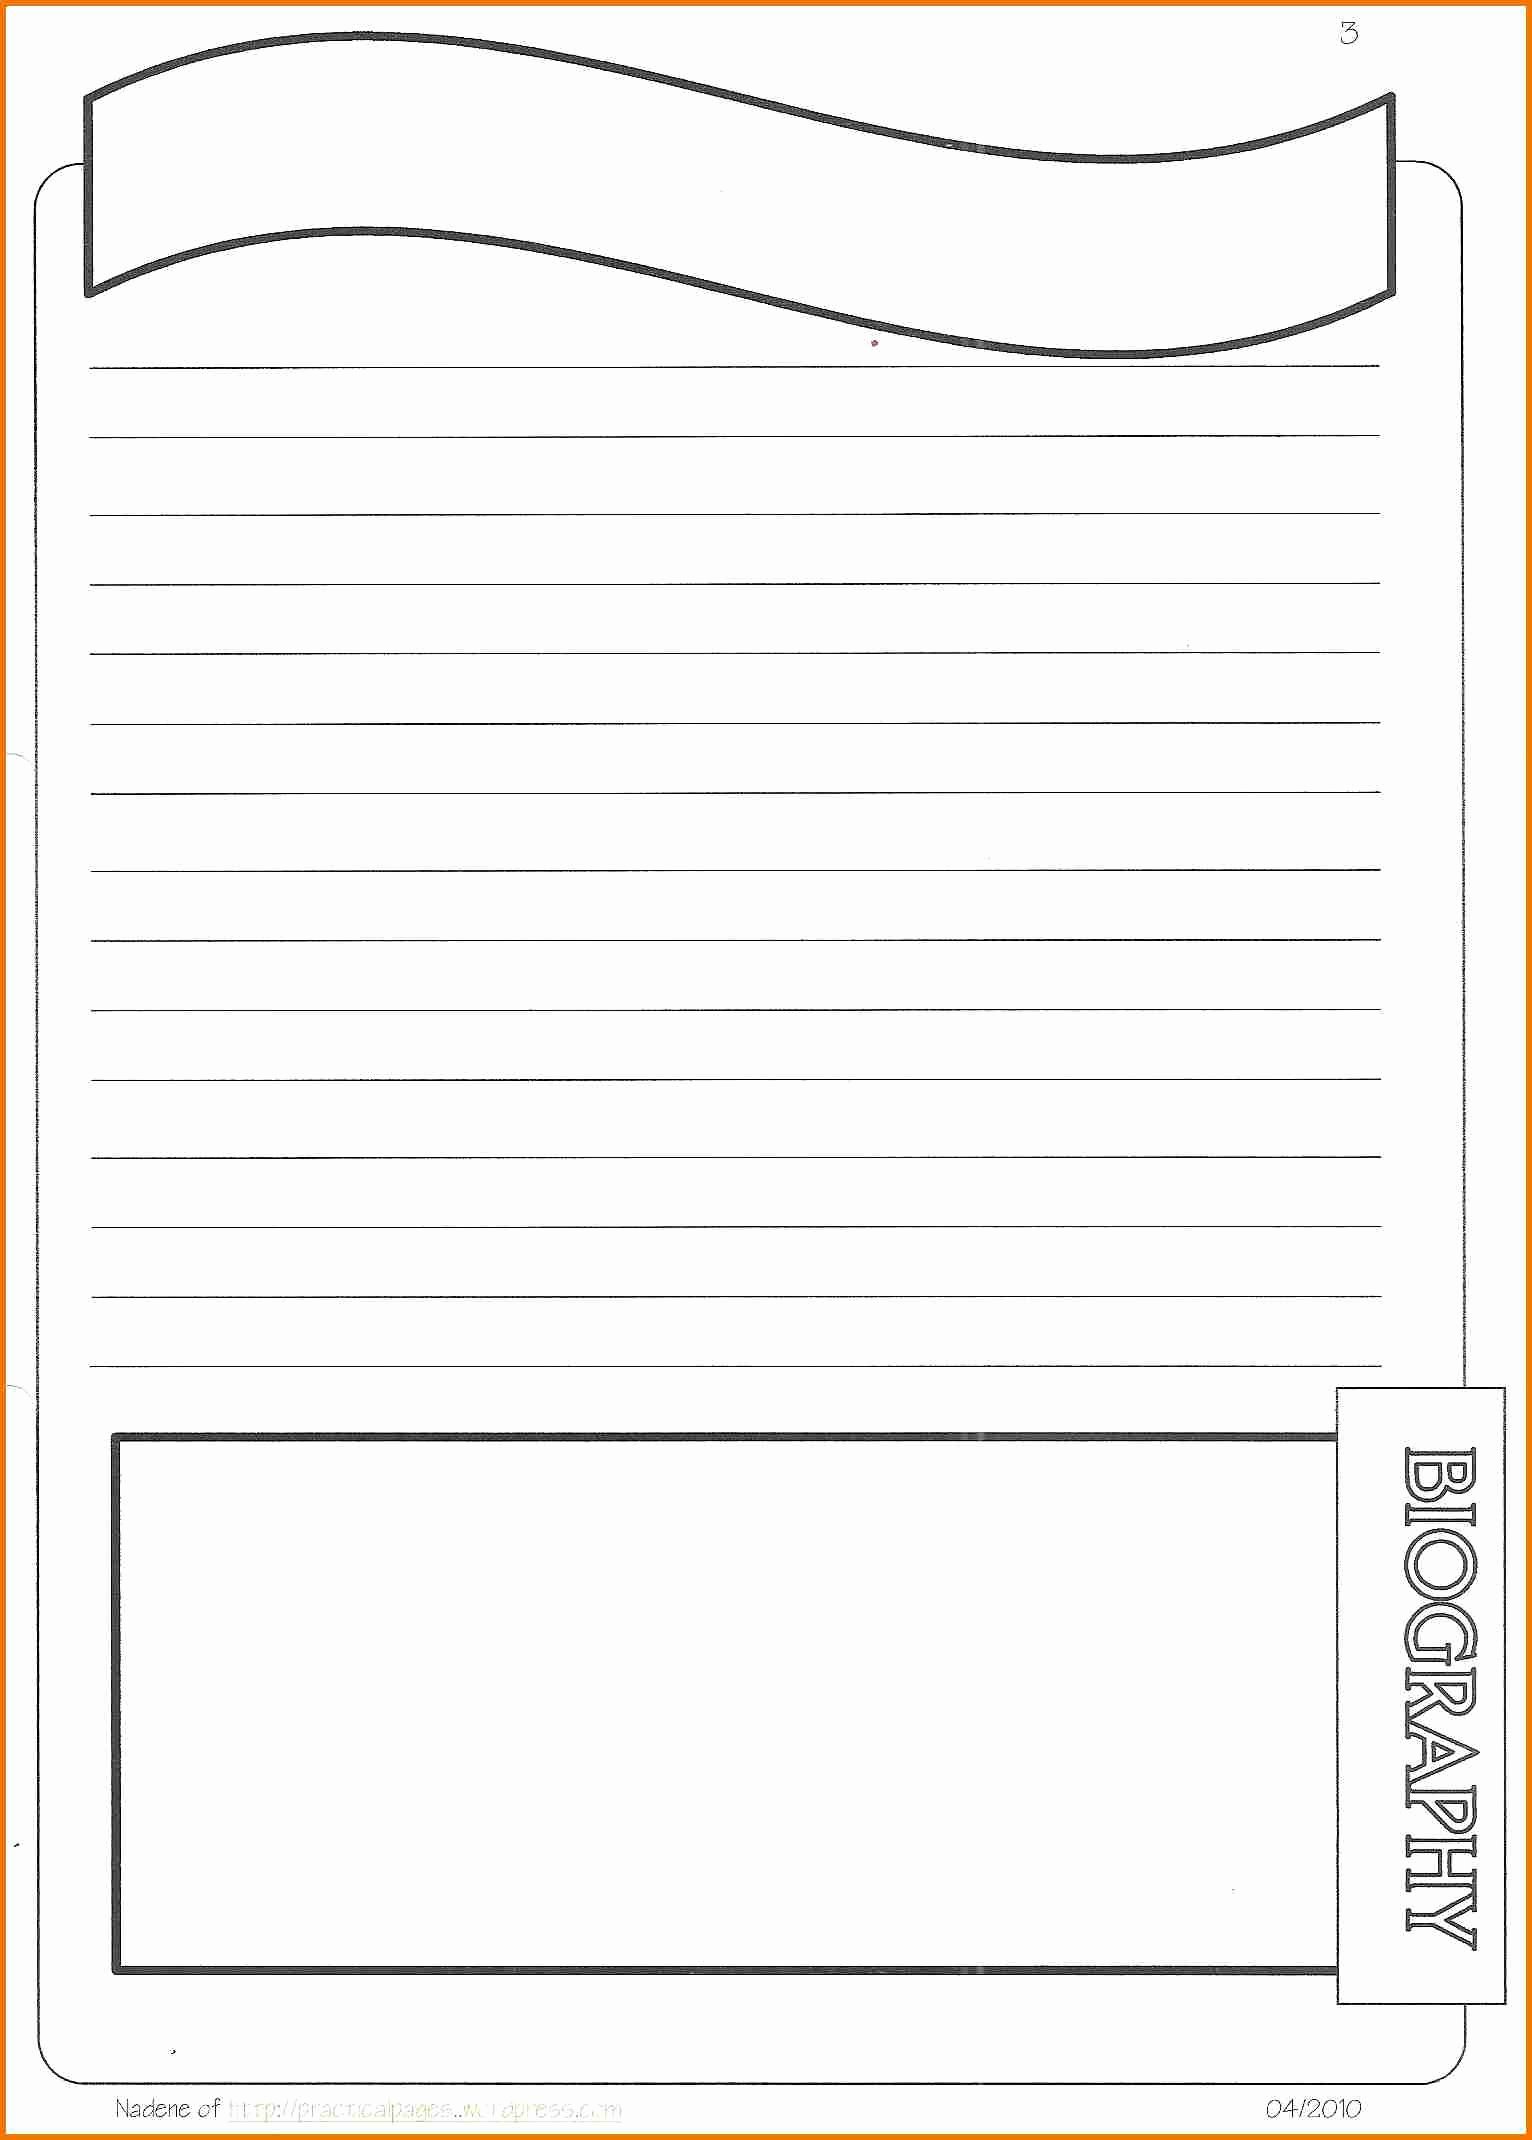 Notebook Template for Word Best Of Notebook Template for Word Portablegasgrillweber